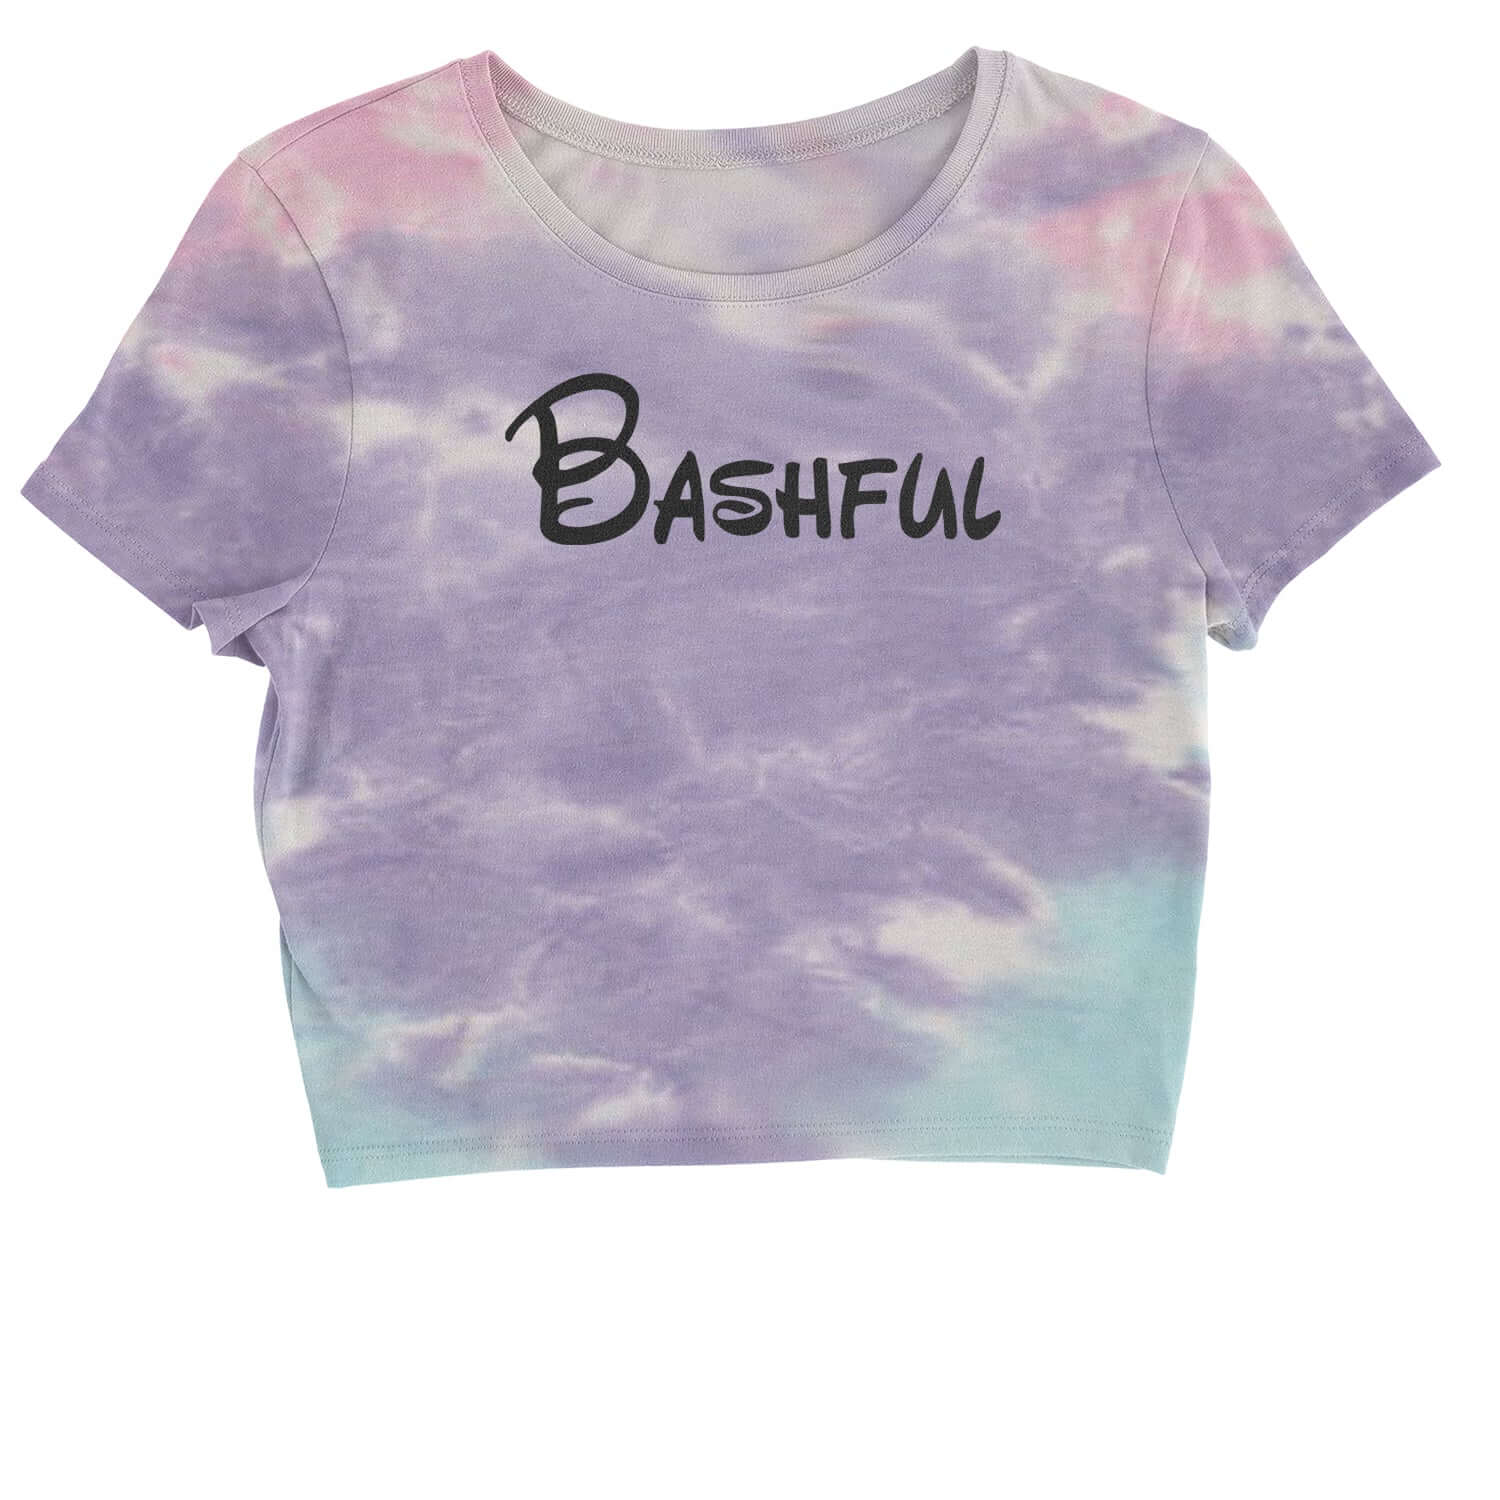 Bashful - 7 Dwarfs Costume Cropped T-Shirt and, costume, dwarfs, group, halloween, matching, seven, snow, the, white by Expression Tees